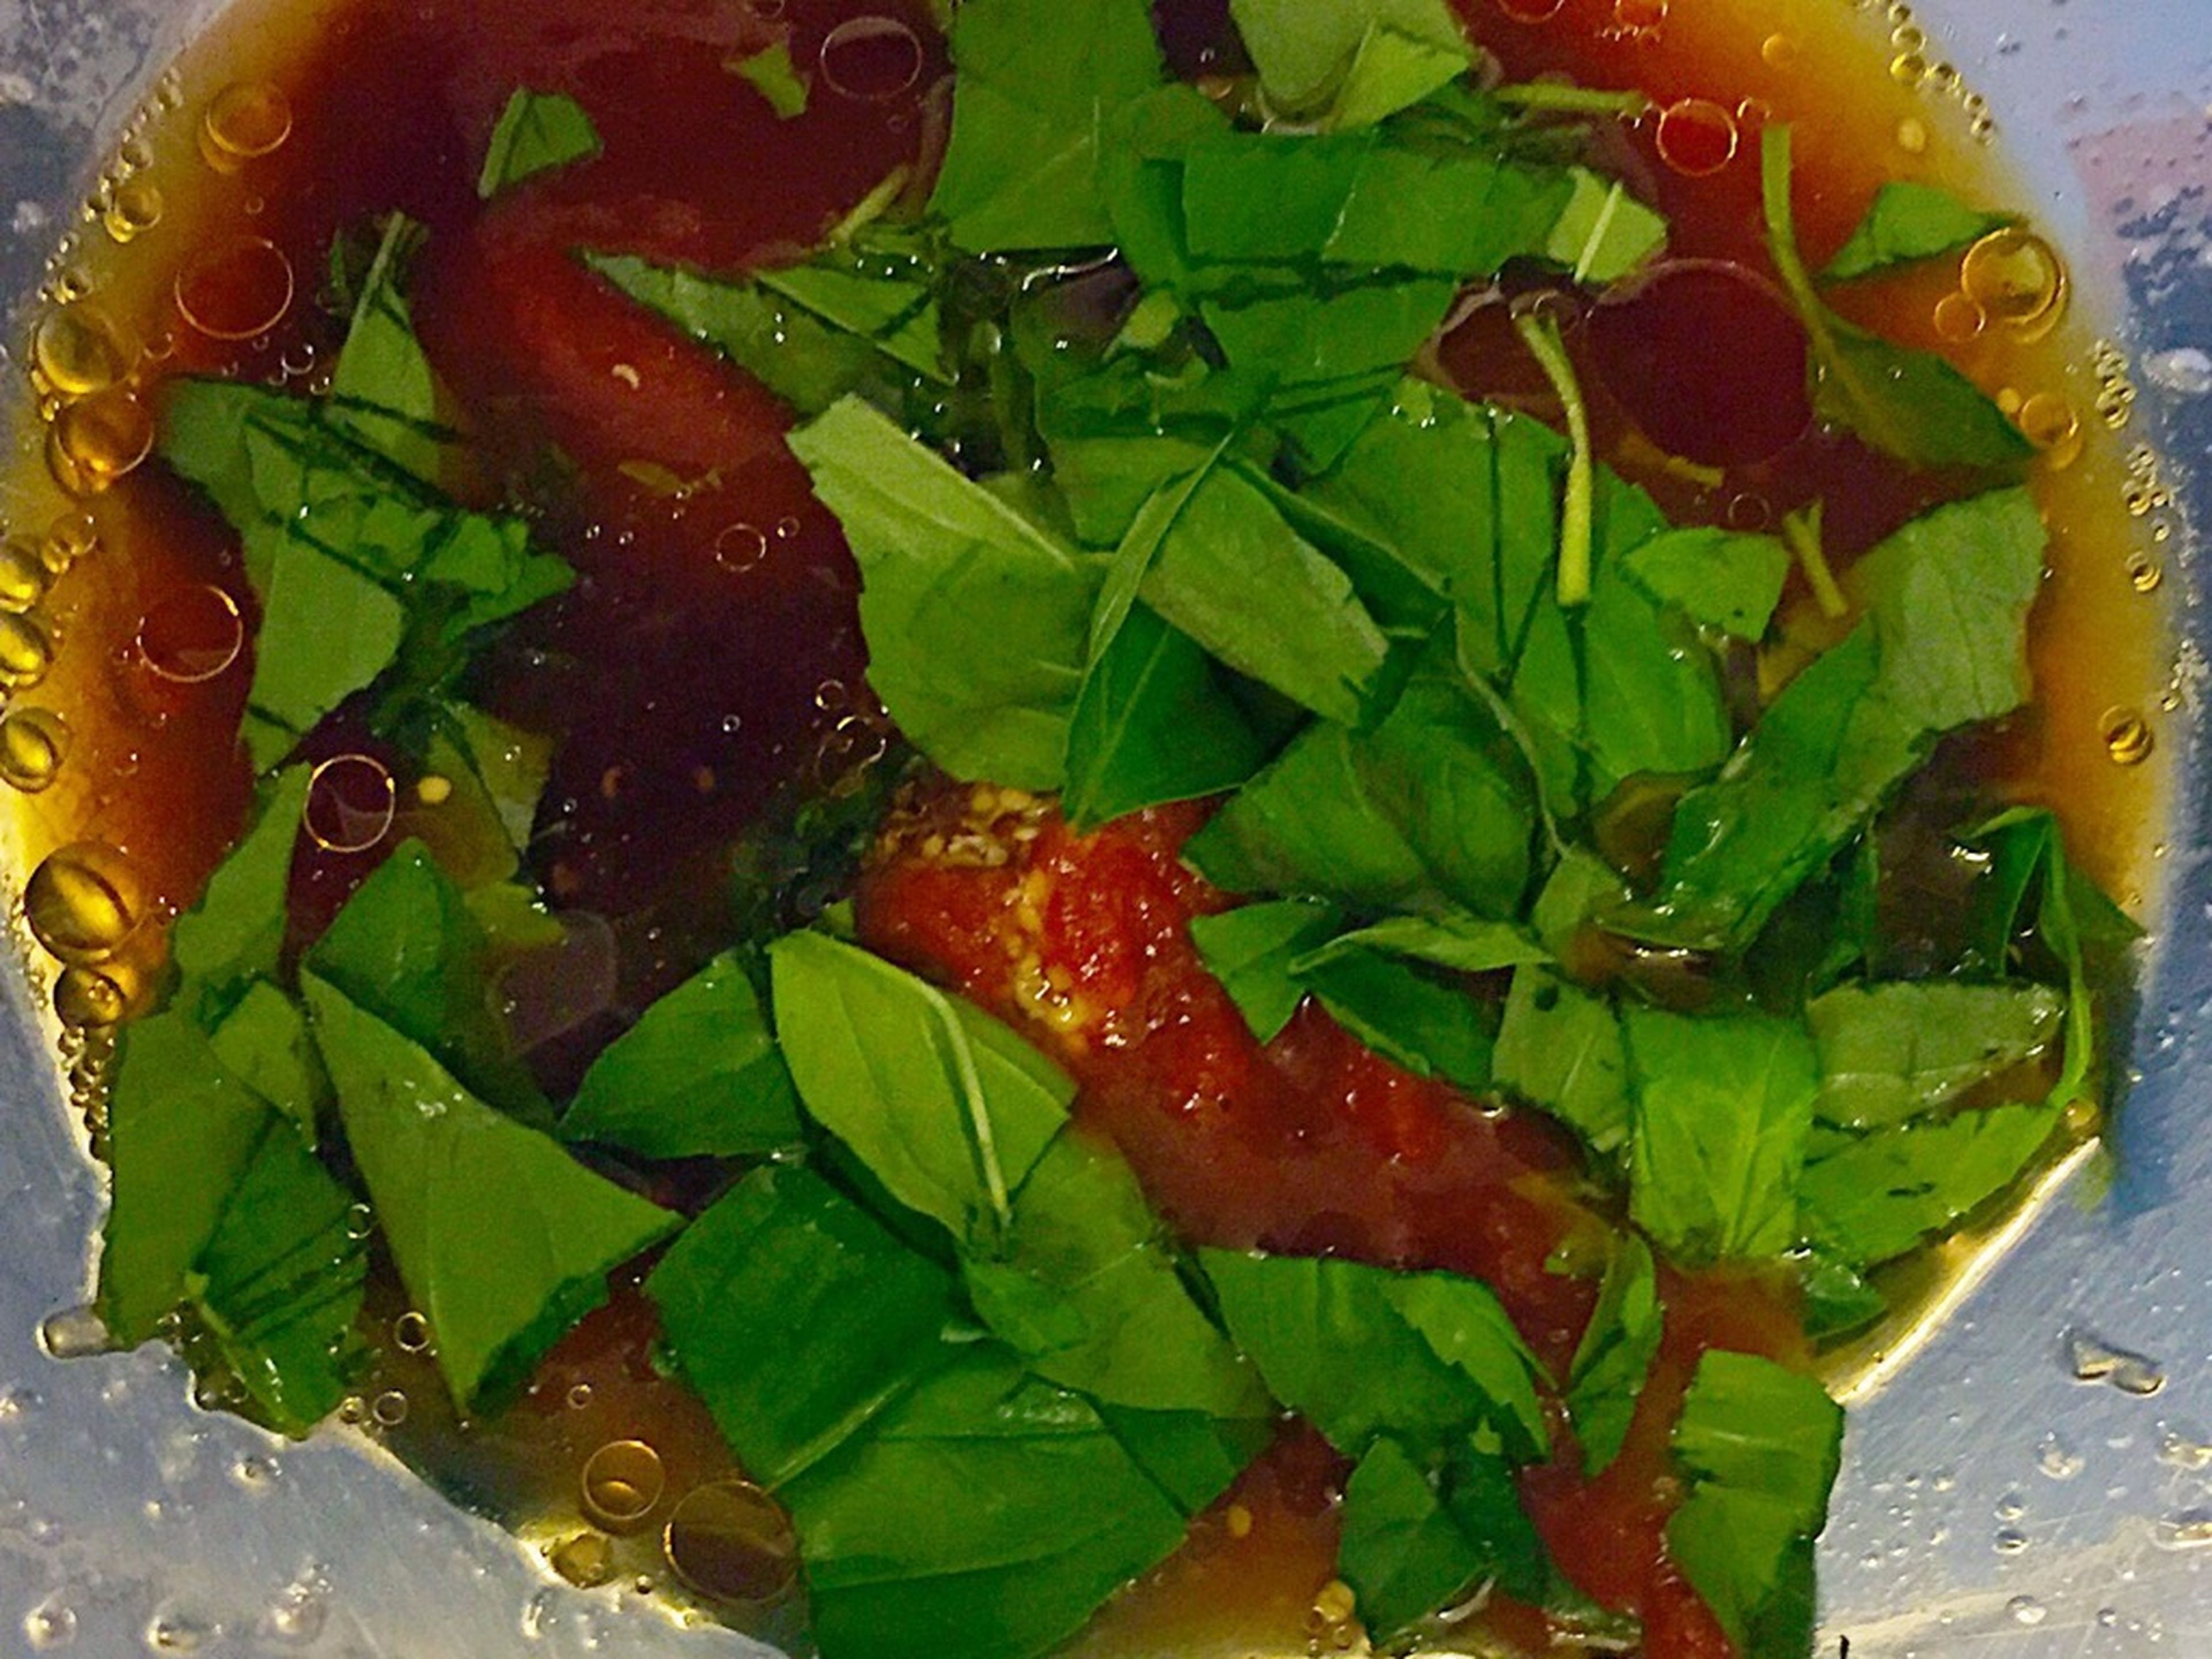 Roughly chop half of the basil, then add to a bowl along with the lemon juice, olive oil, soy sauce, and sesame oil.